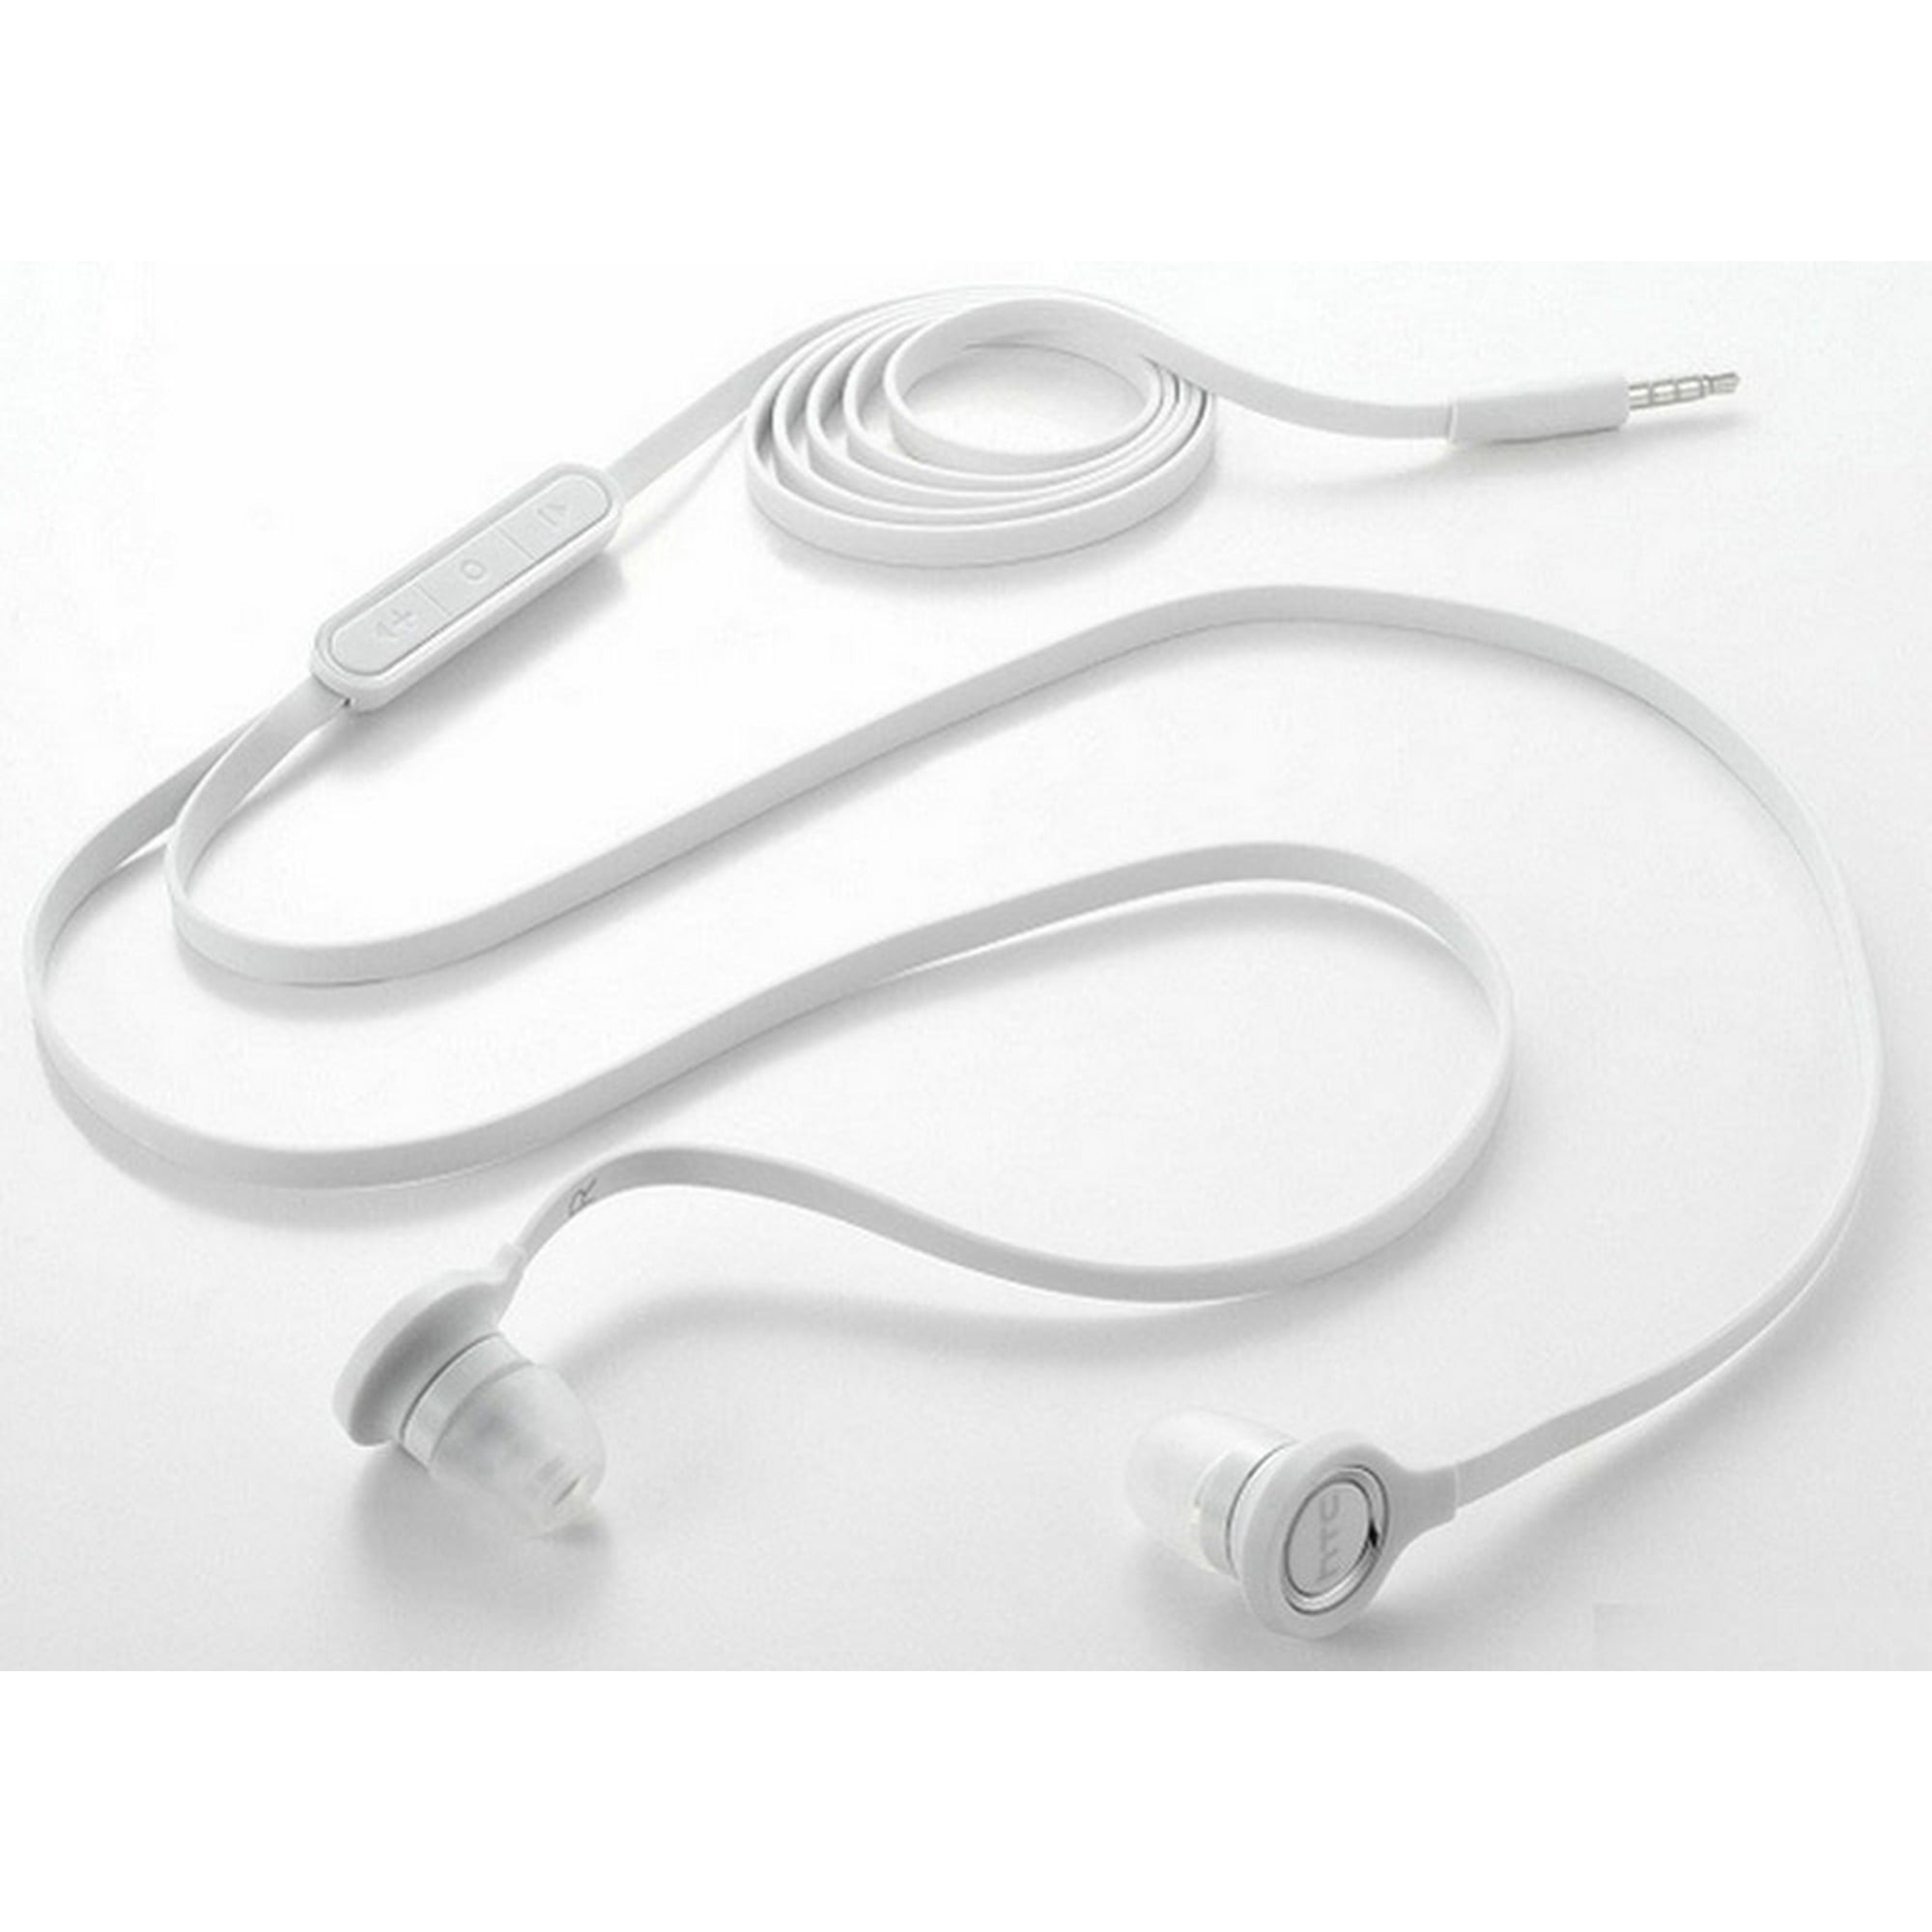 Hands-free Earphones for Galaxy Tab A (2020) Tablets - Headphones Headset w Mic Earbuds HTC for Samsung Galaxy Tab A 8.4 (2020) - Walmart.com